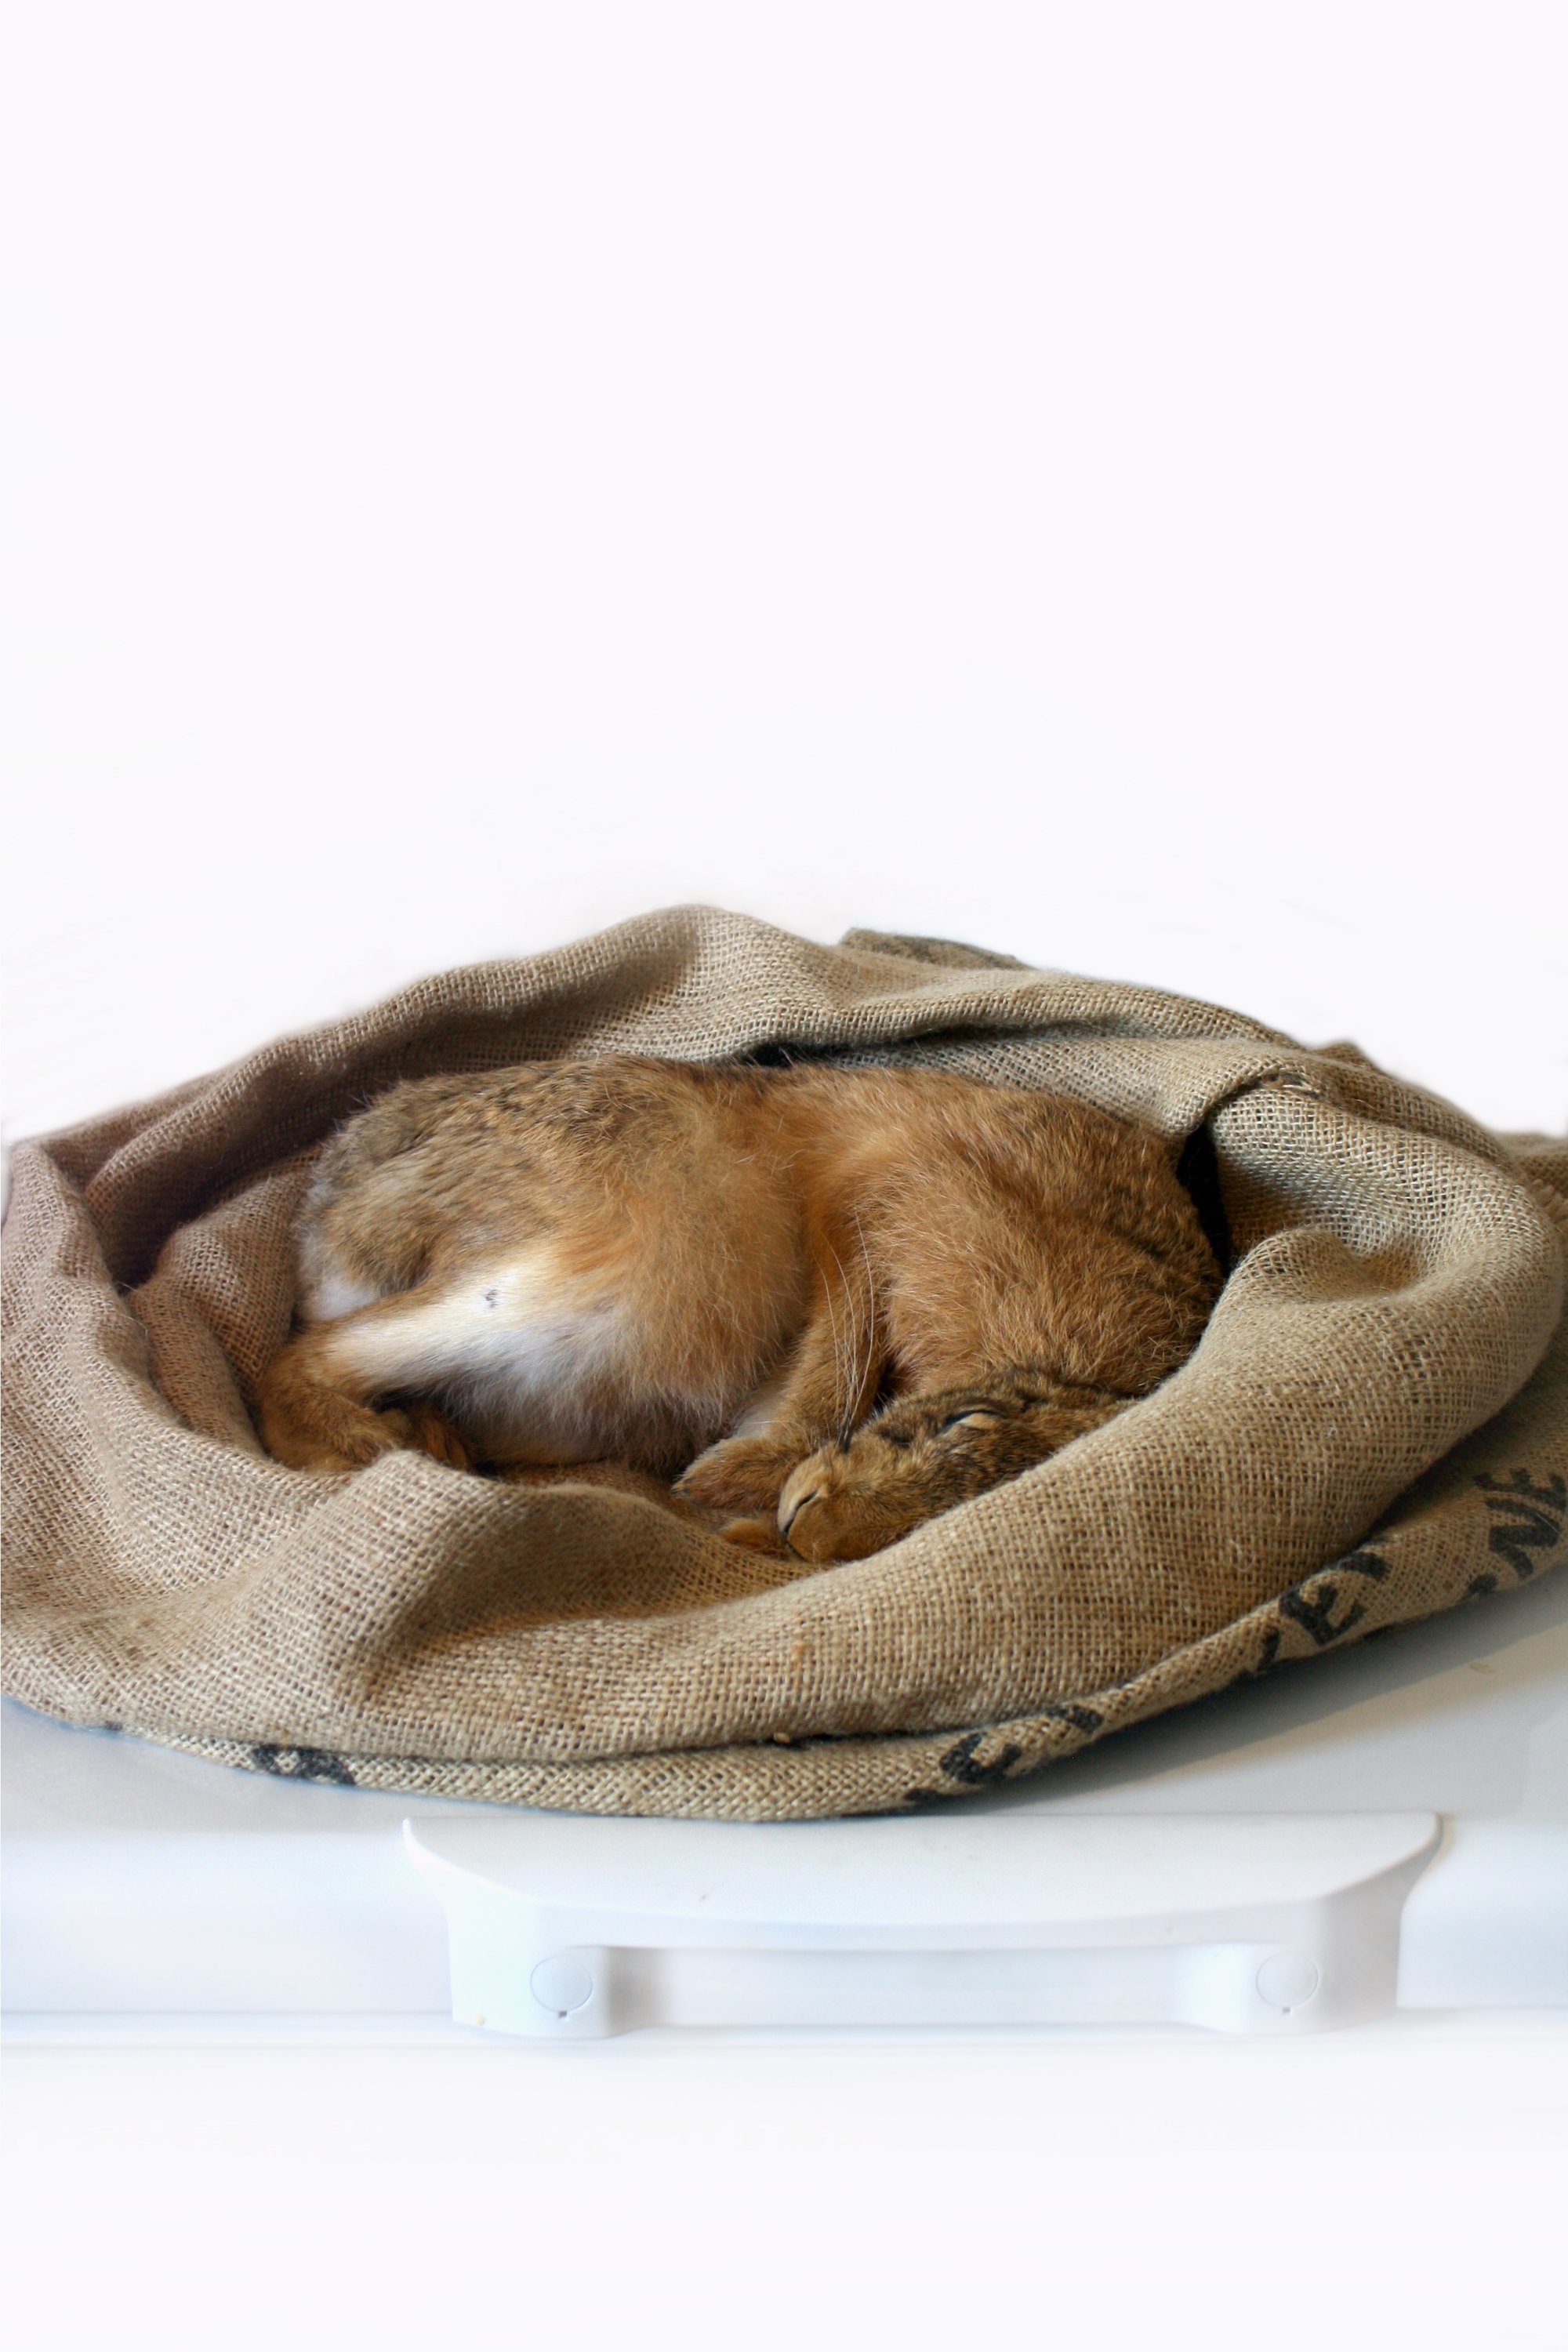 Image of Untitled (hare in coffee sack) 2021